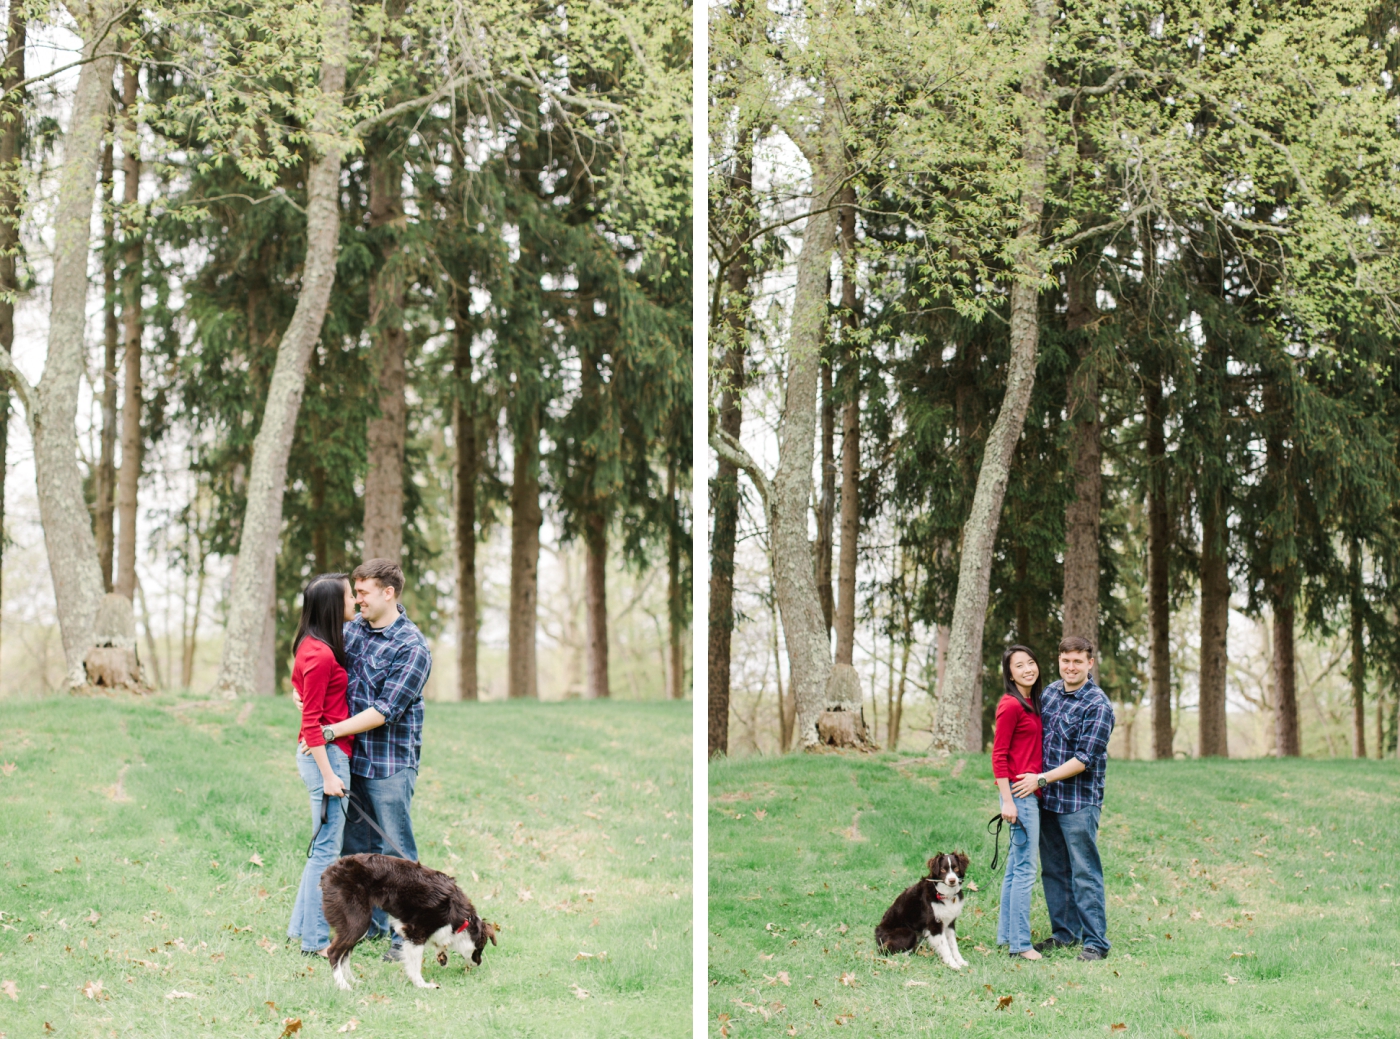 Engagement session poses with a dog